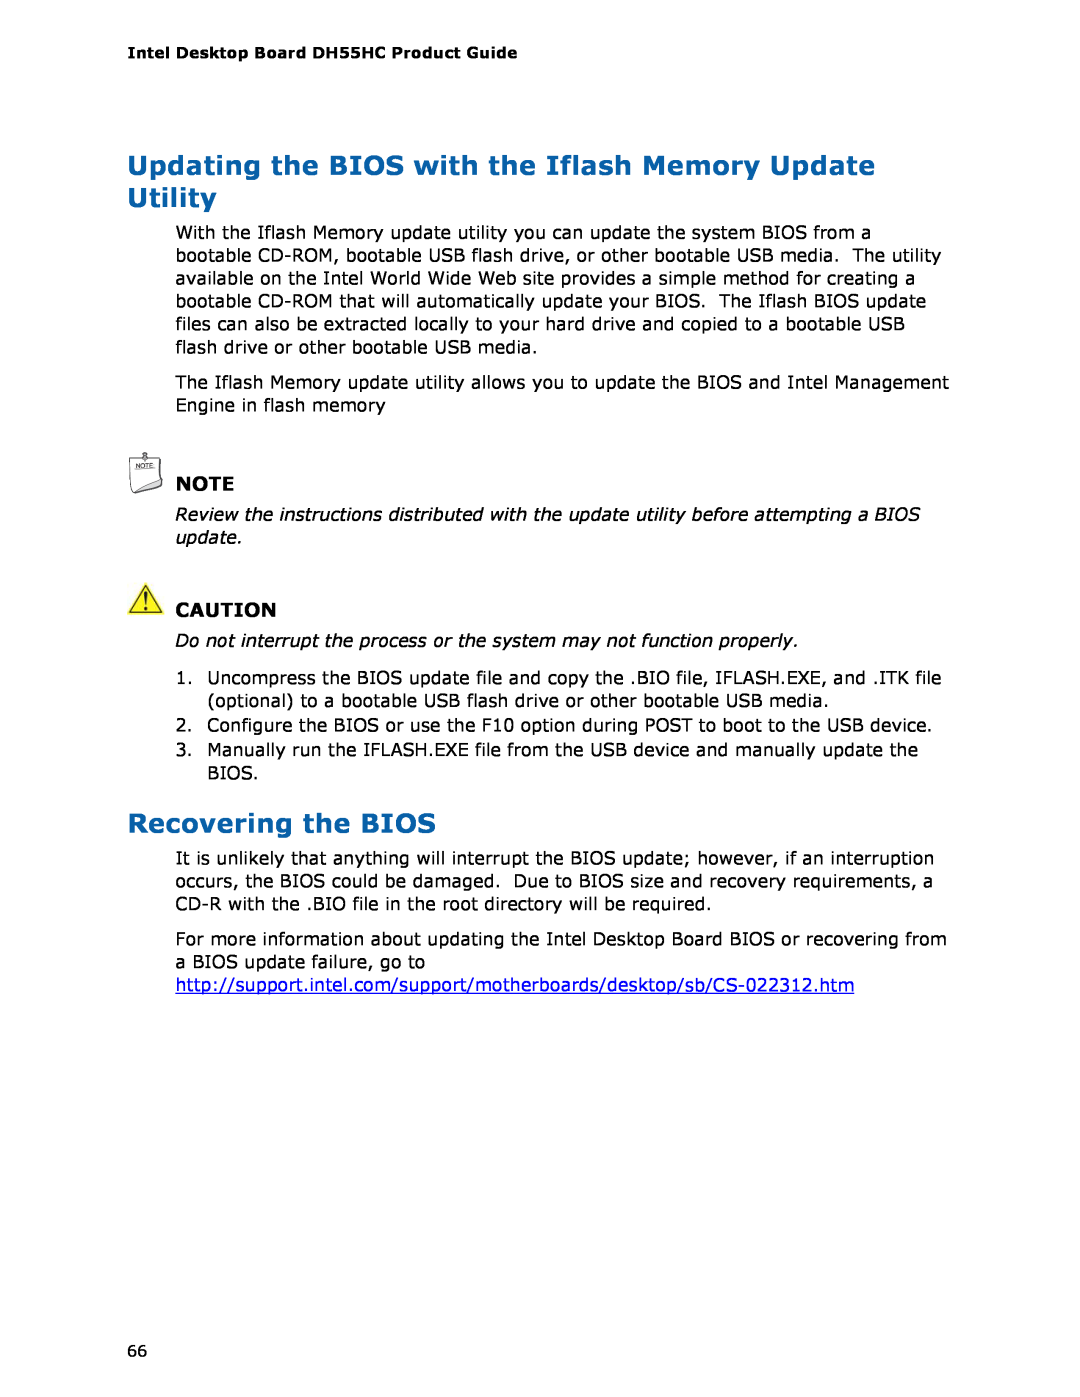 Intel BOXDH55HC manual Updating the BIOS with the Iflash Memory Update Utility, Recovering the BIOS 